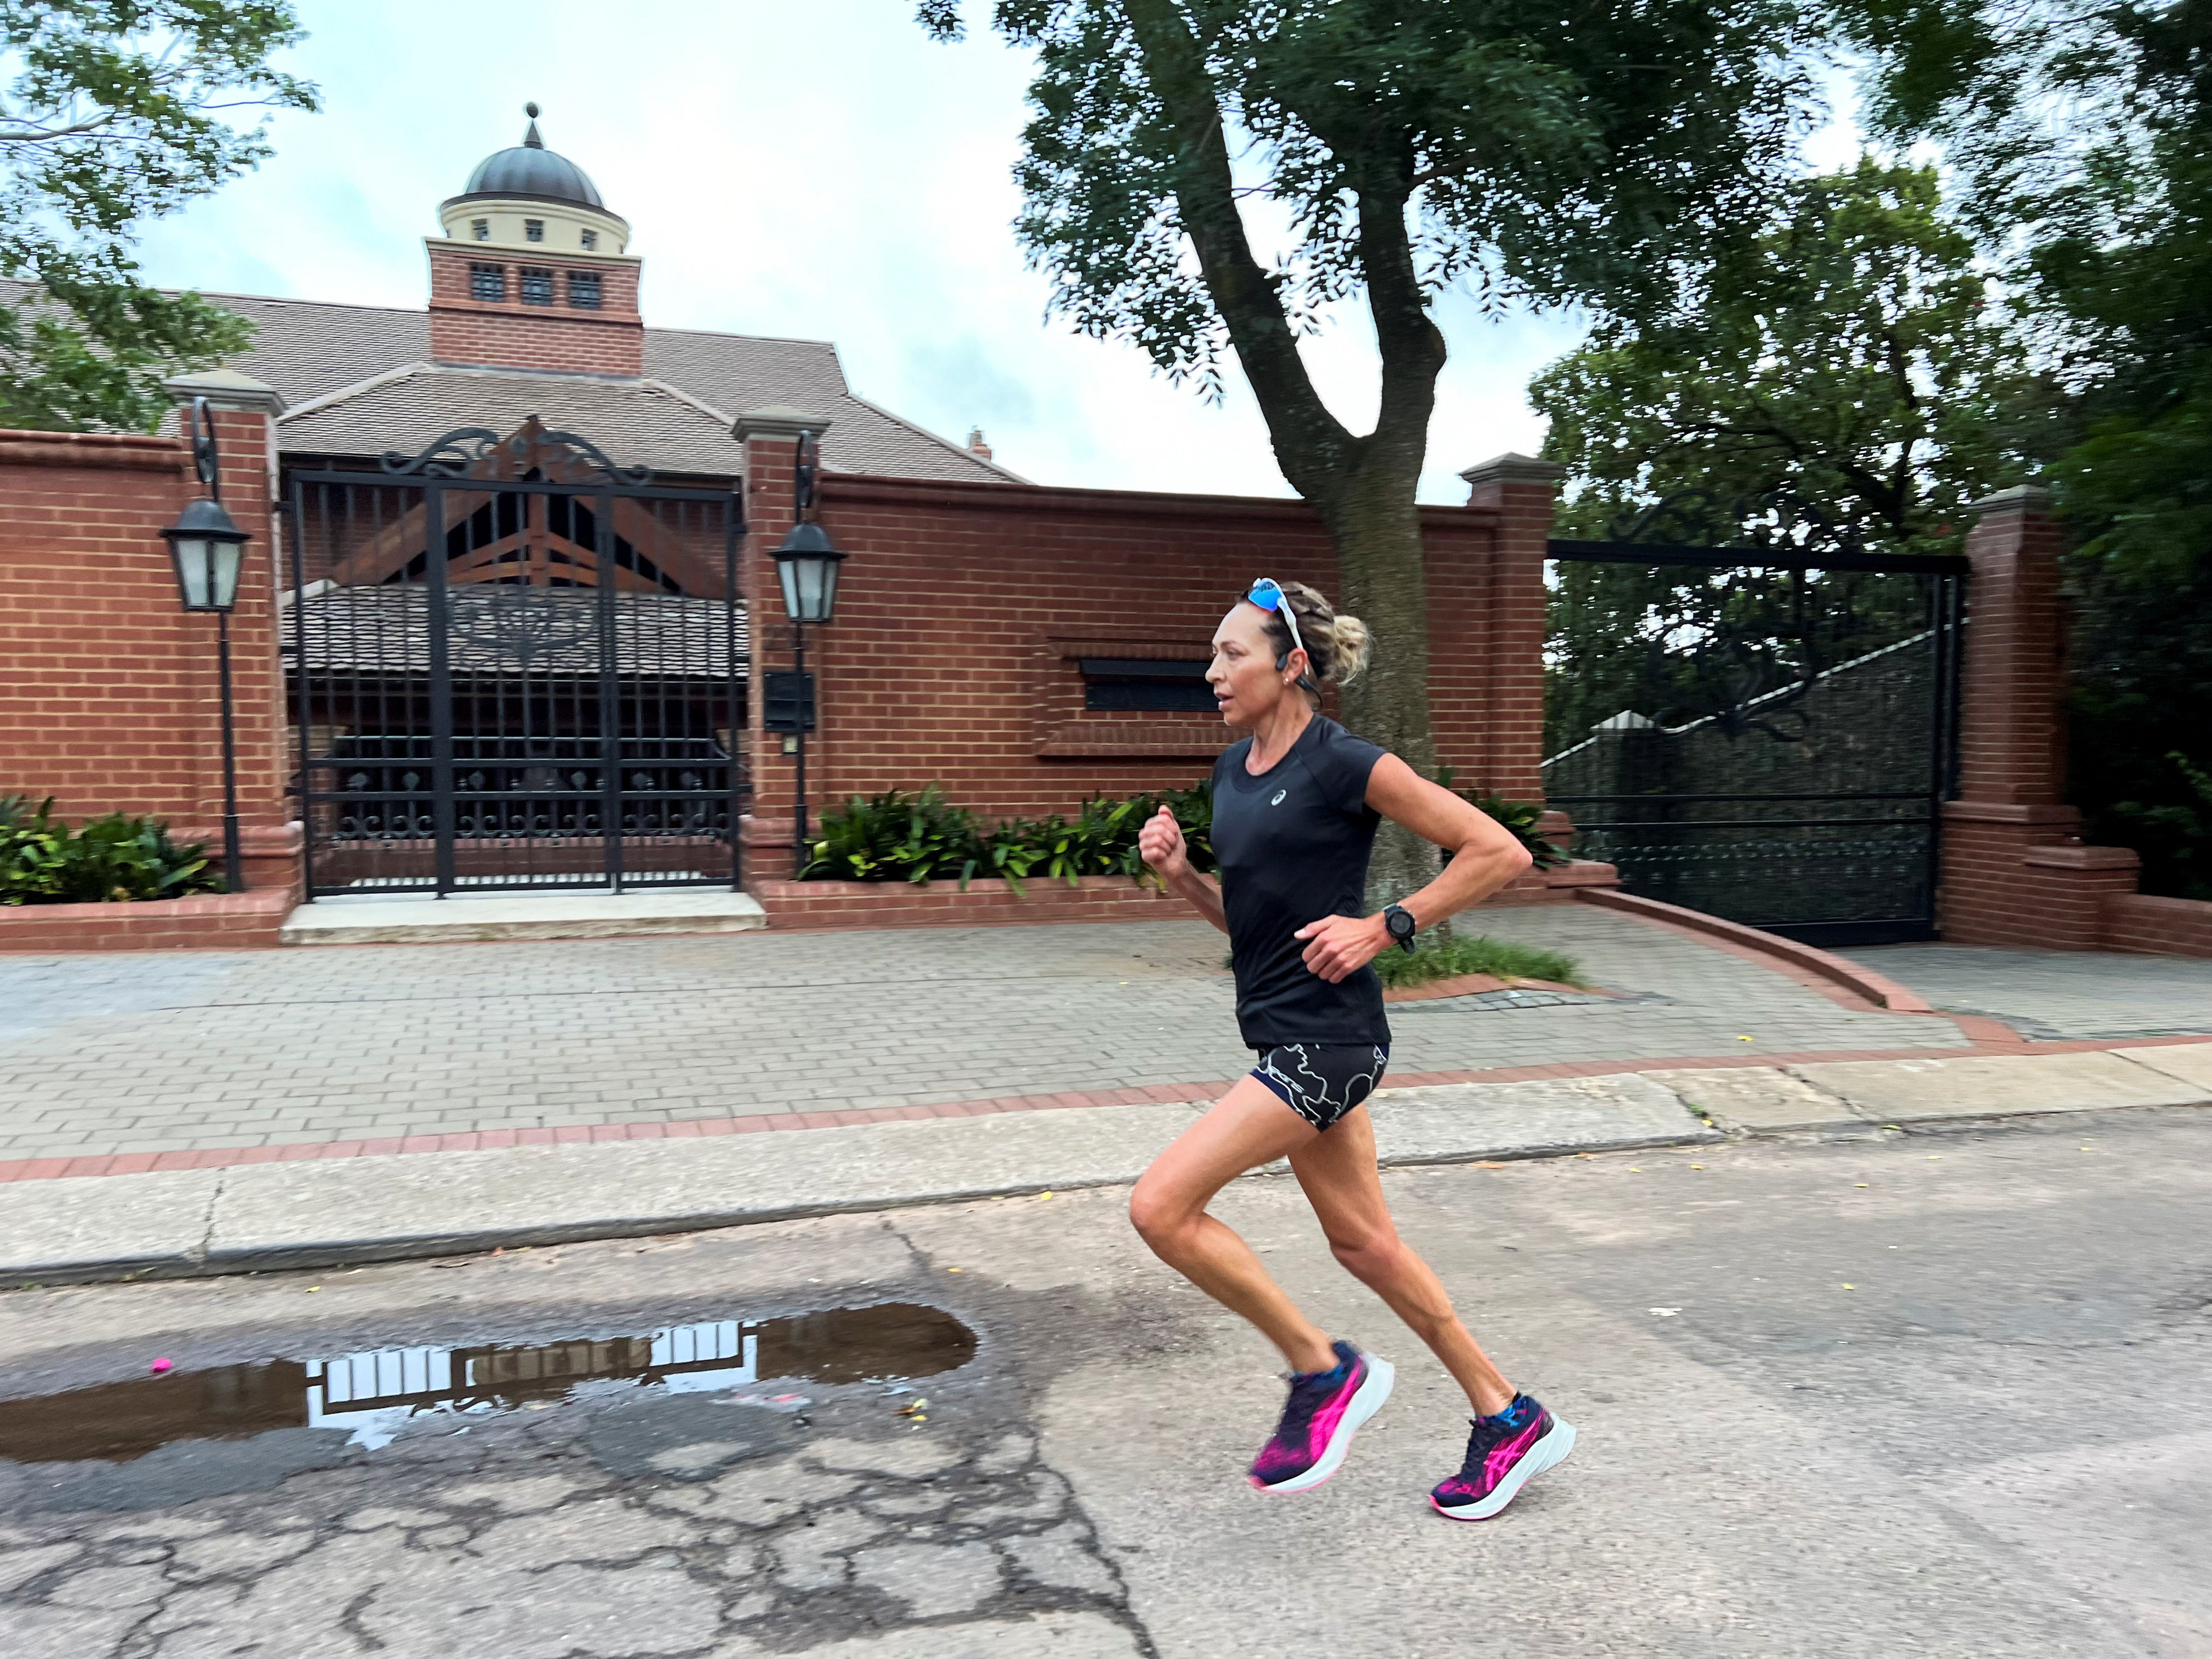 A woman jogs past the house of Oscar Pistorius' uncle Arnold, ahead of Oscar Pistorius' expected release from prison, in Pretoria, South Africa